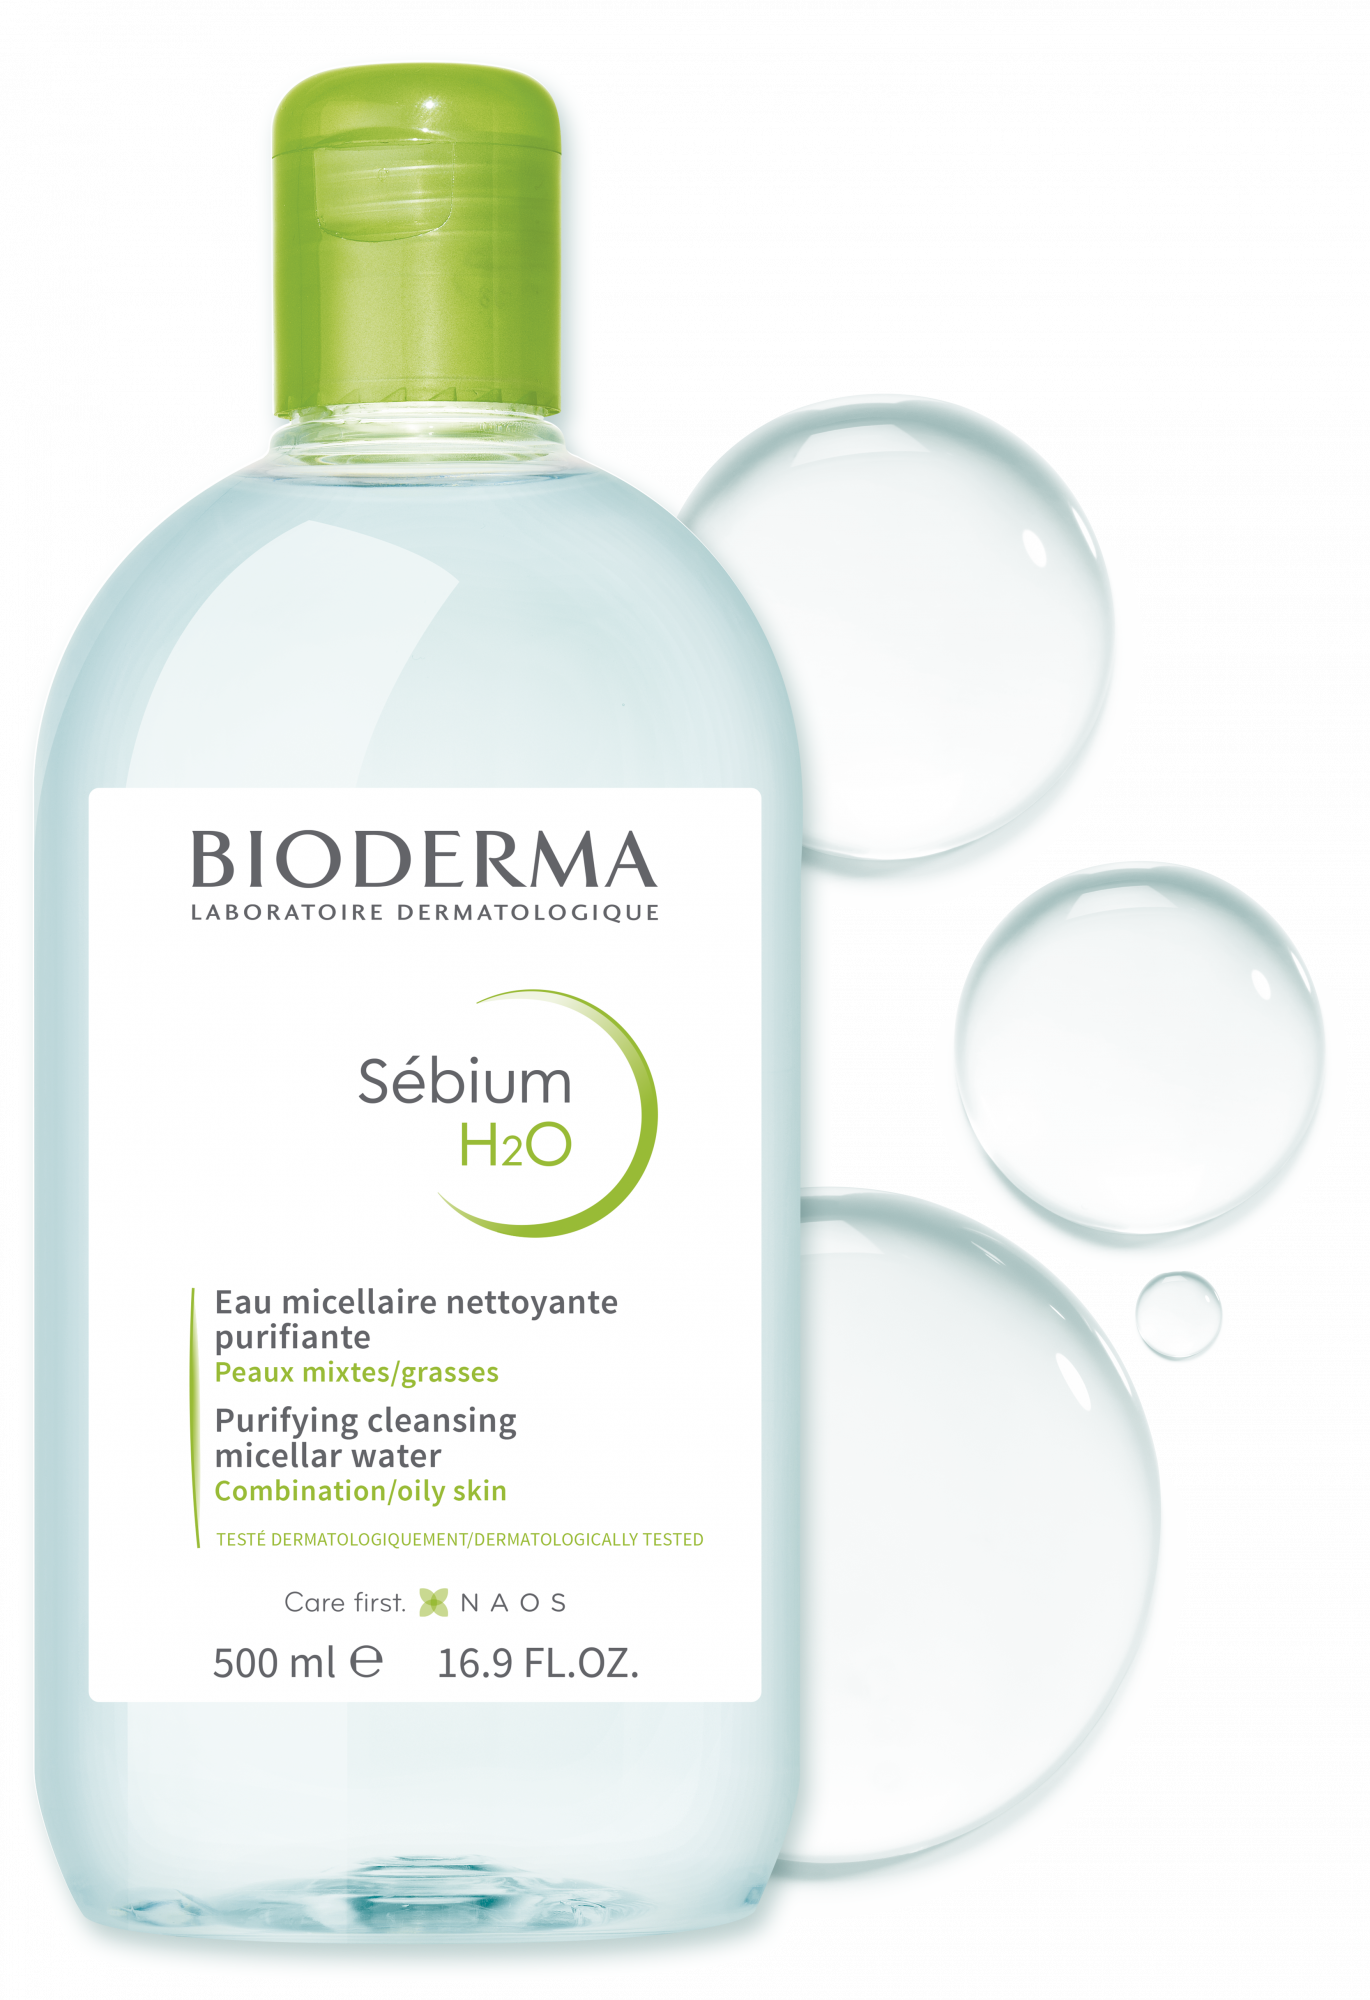 Bioderma - Hydrabio H2O Micellar Water - Face Cleanser and Makeup Remover -  Micellar Cleansing Water for Dehydrated Sensitive Skin